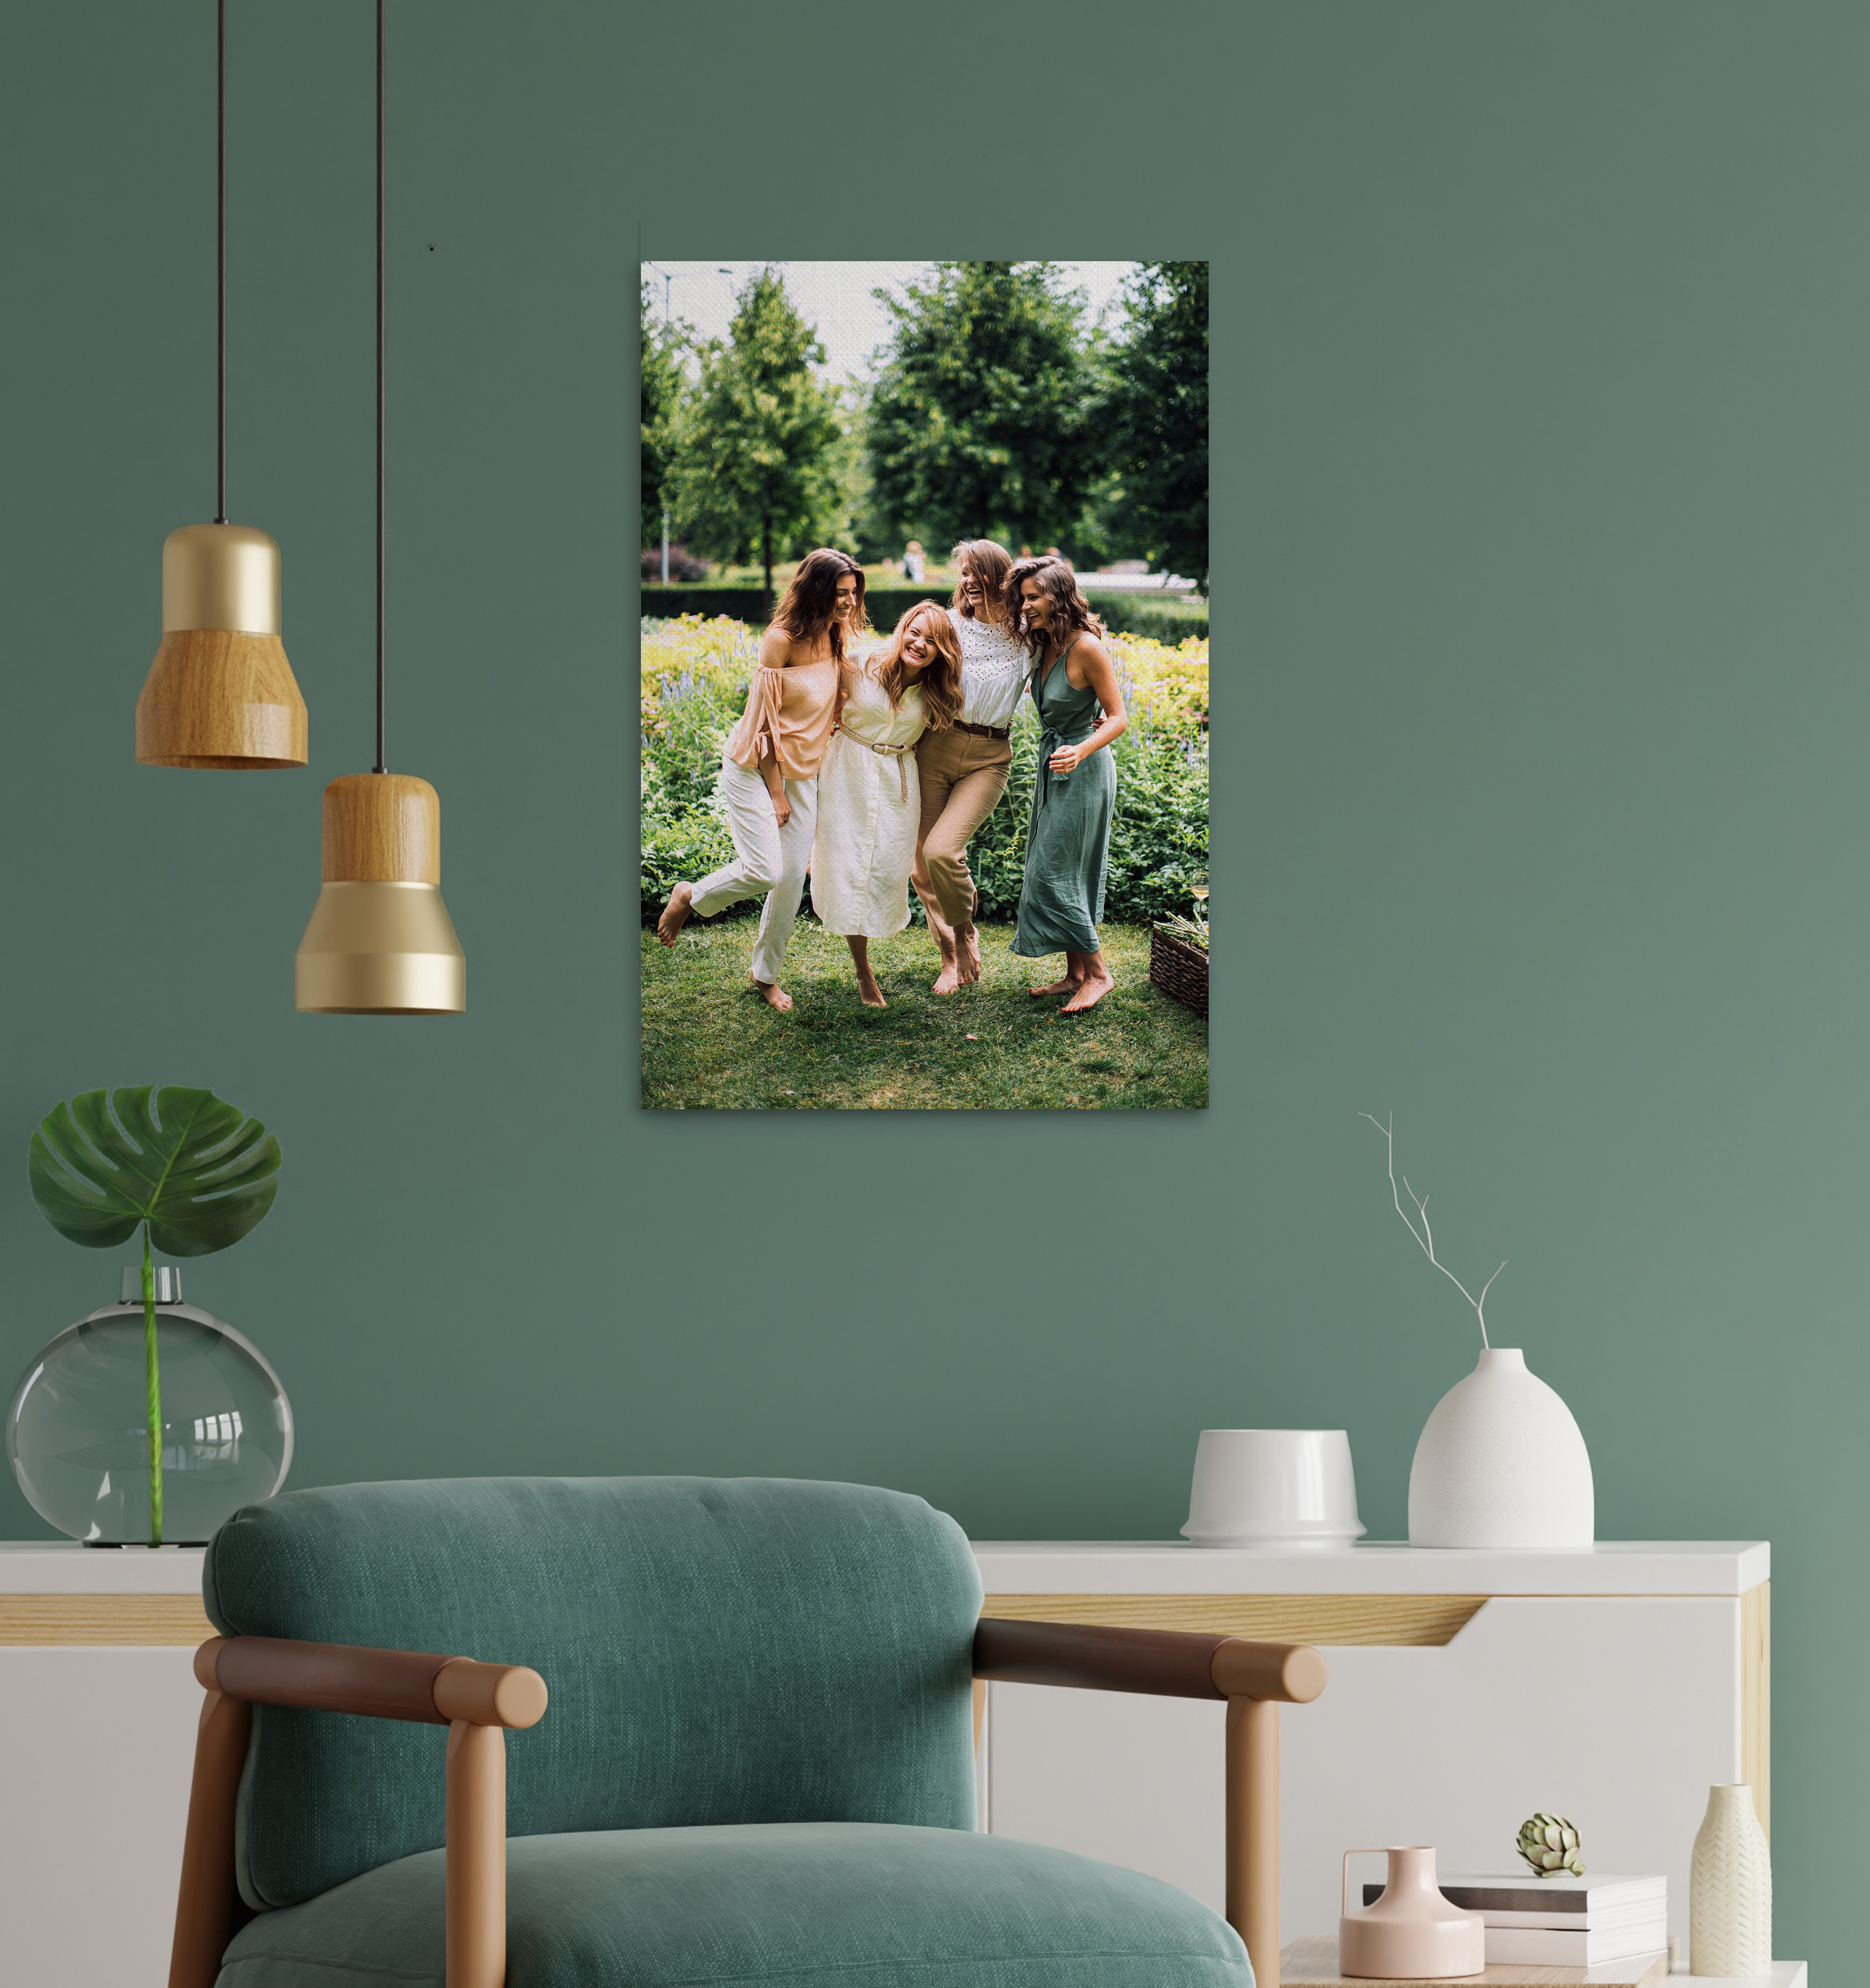 Canvas art of a group of girls with a green wall background